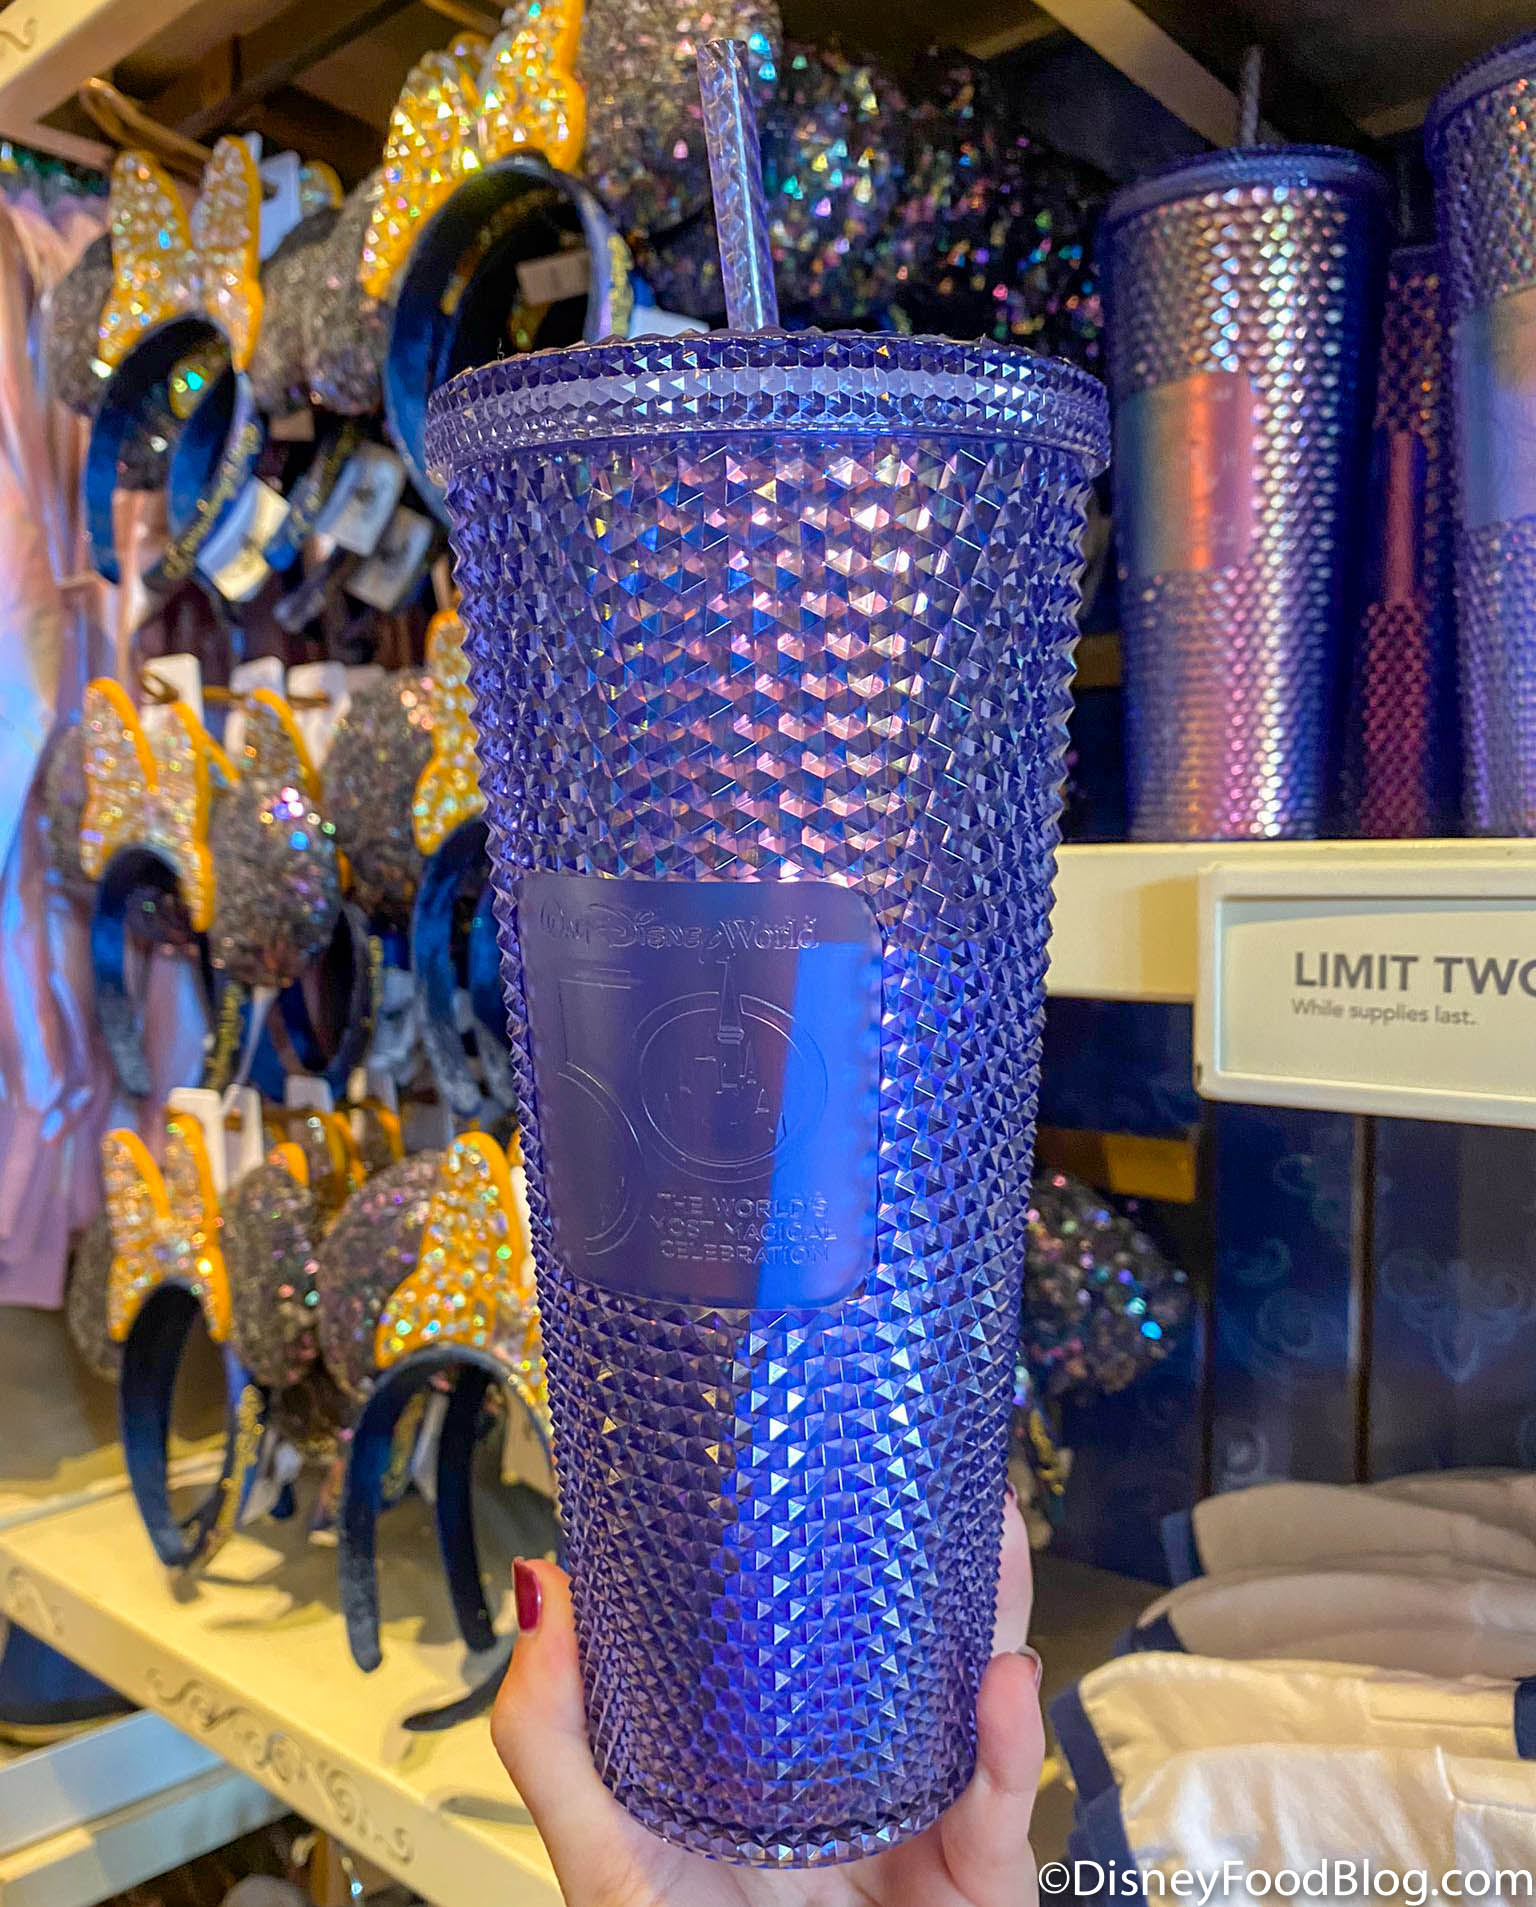 Disney 50th anniversary Loungefly and starbucks tumbler and